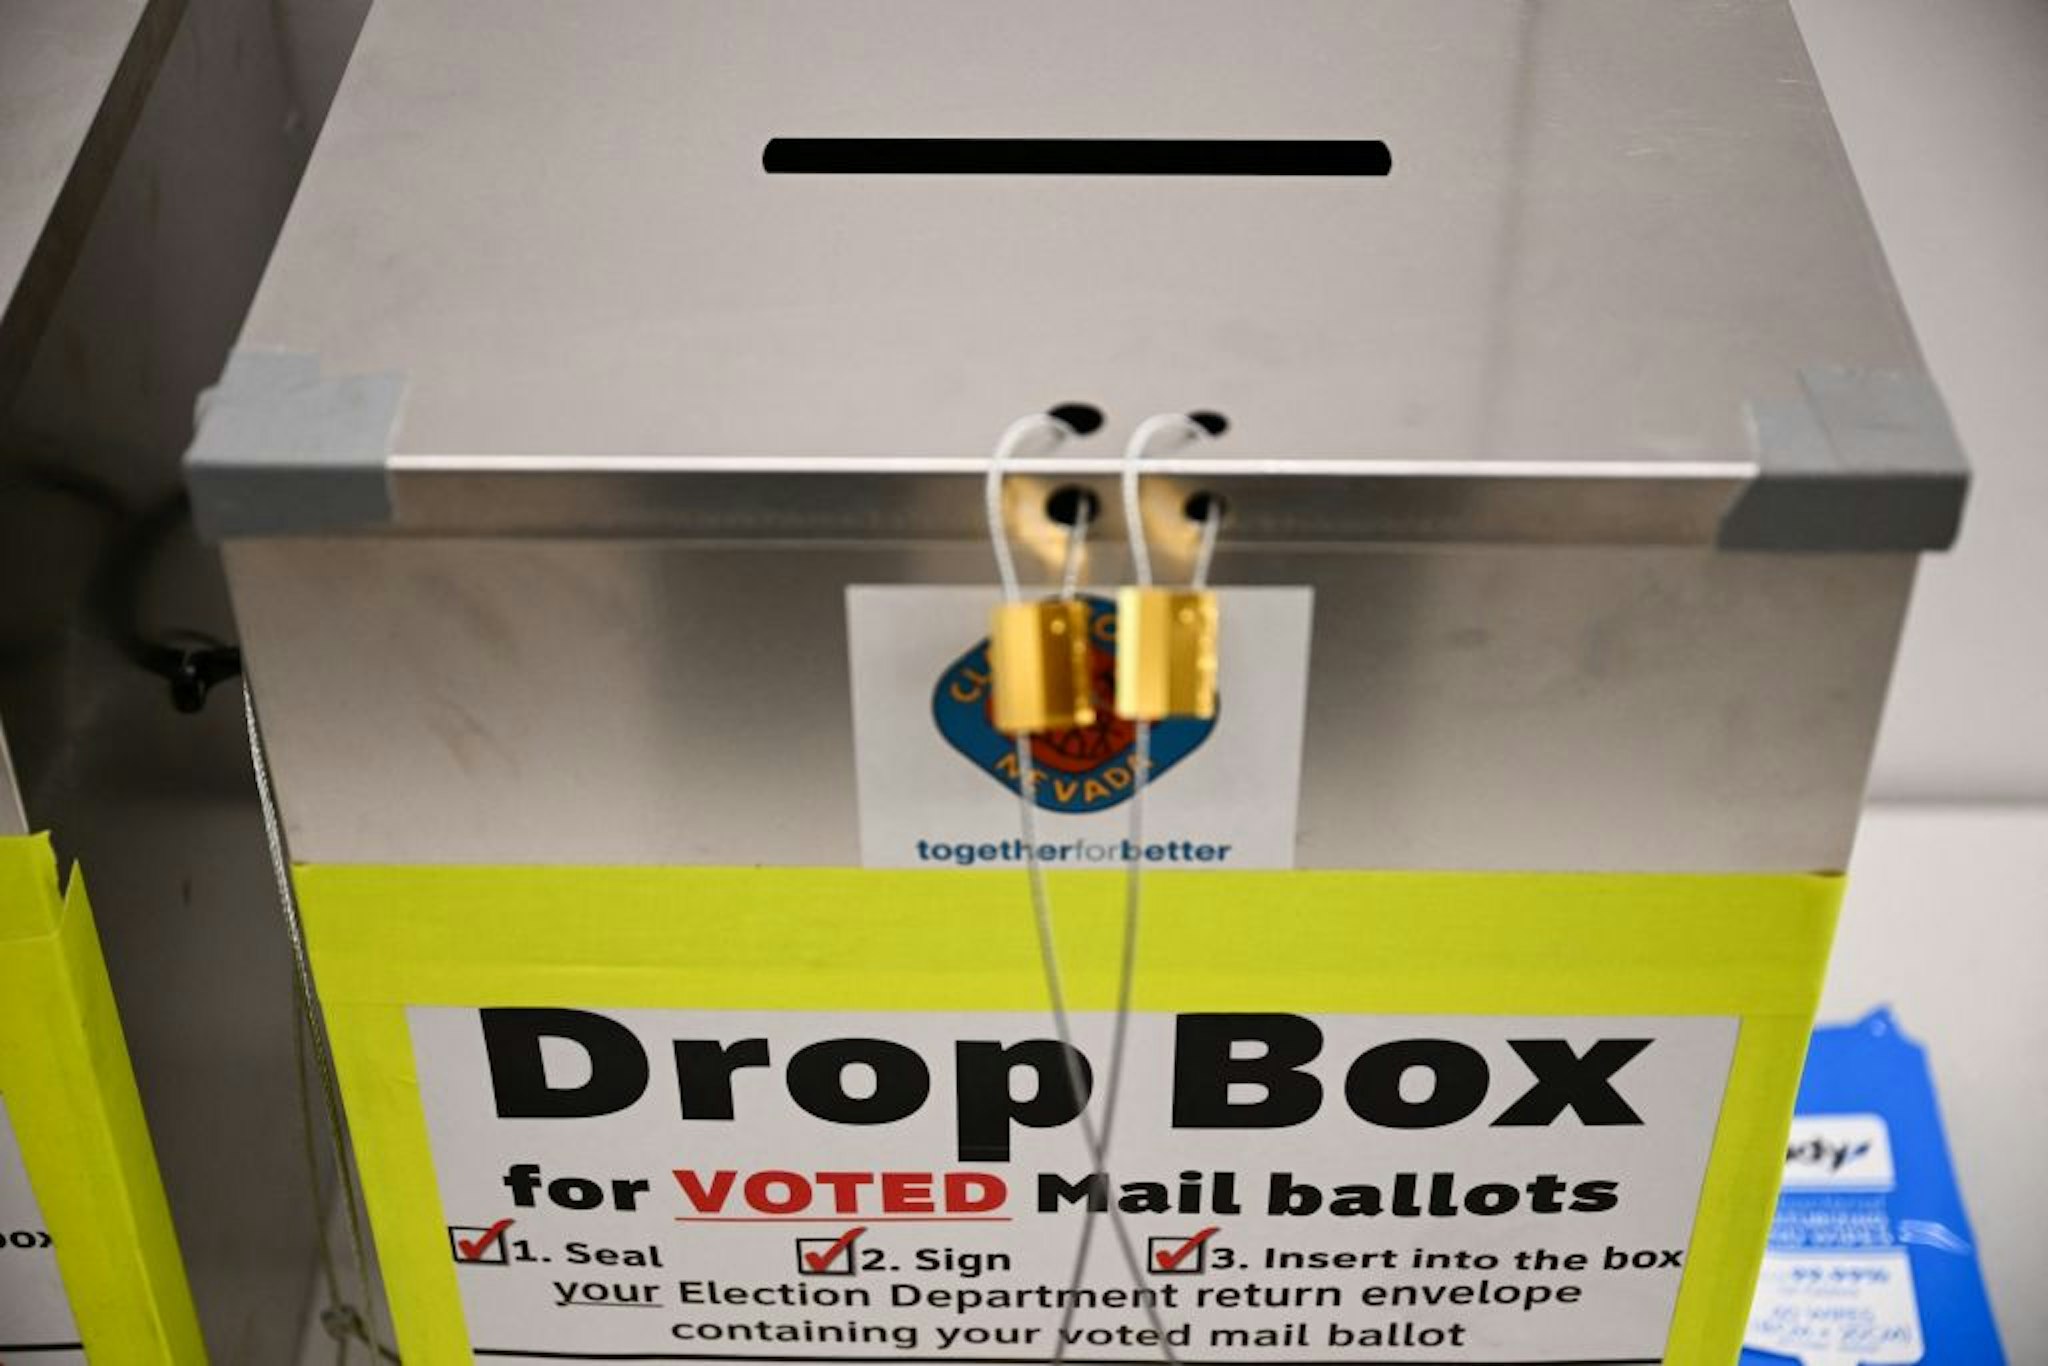 A ballot drop box for voted mail ballots is displayed in a Clark County vote center on Election Day during the Nevada 2024 presidential primary election in Las Vegas, Nevada, on February 6, 2024. (Photo by Patrick T. Fallon / AFP)